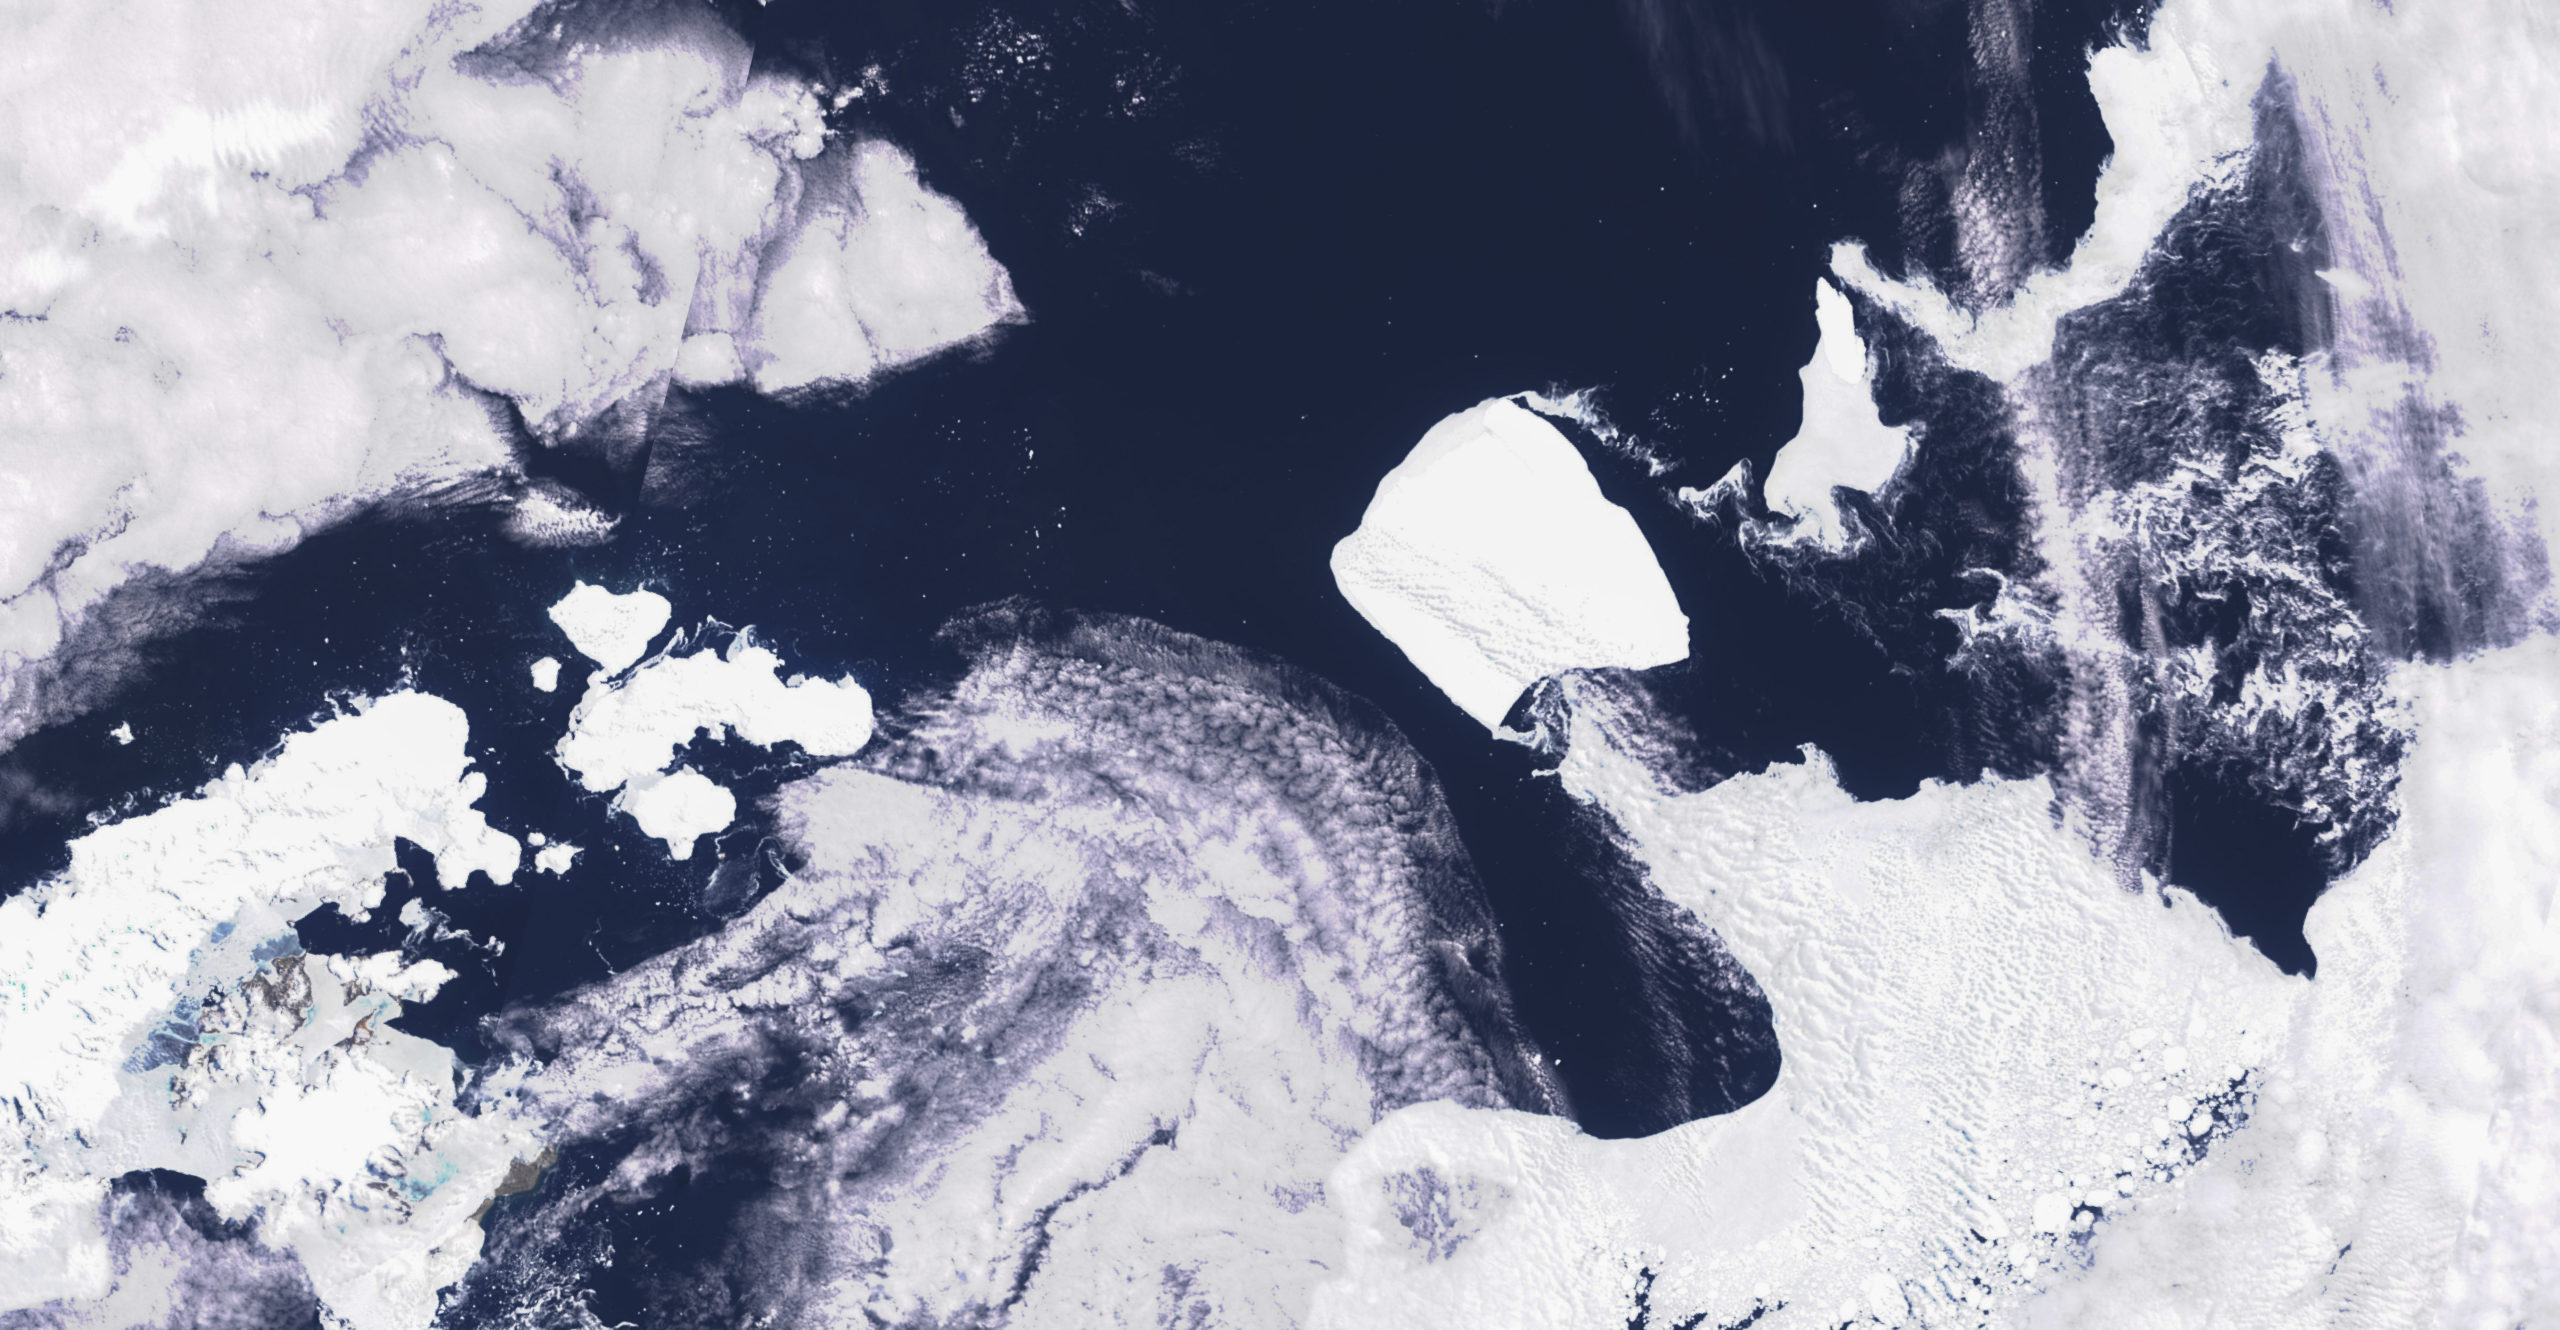 This images provided by Maxar Technologies shows the A23a iceberg moving through the sea near Antarctica on Nov. 15.